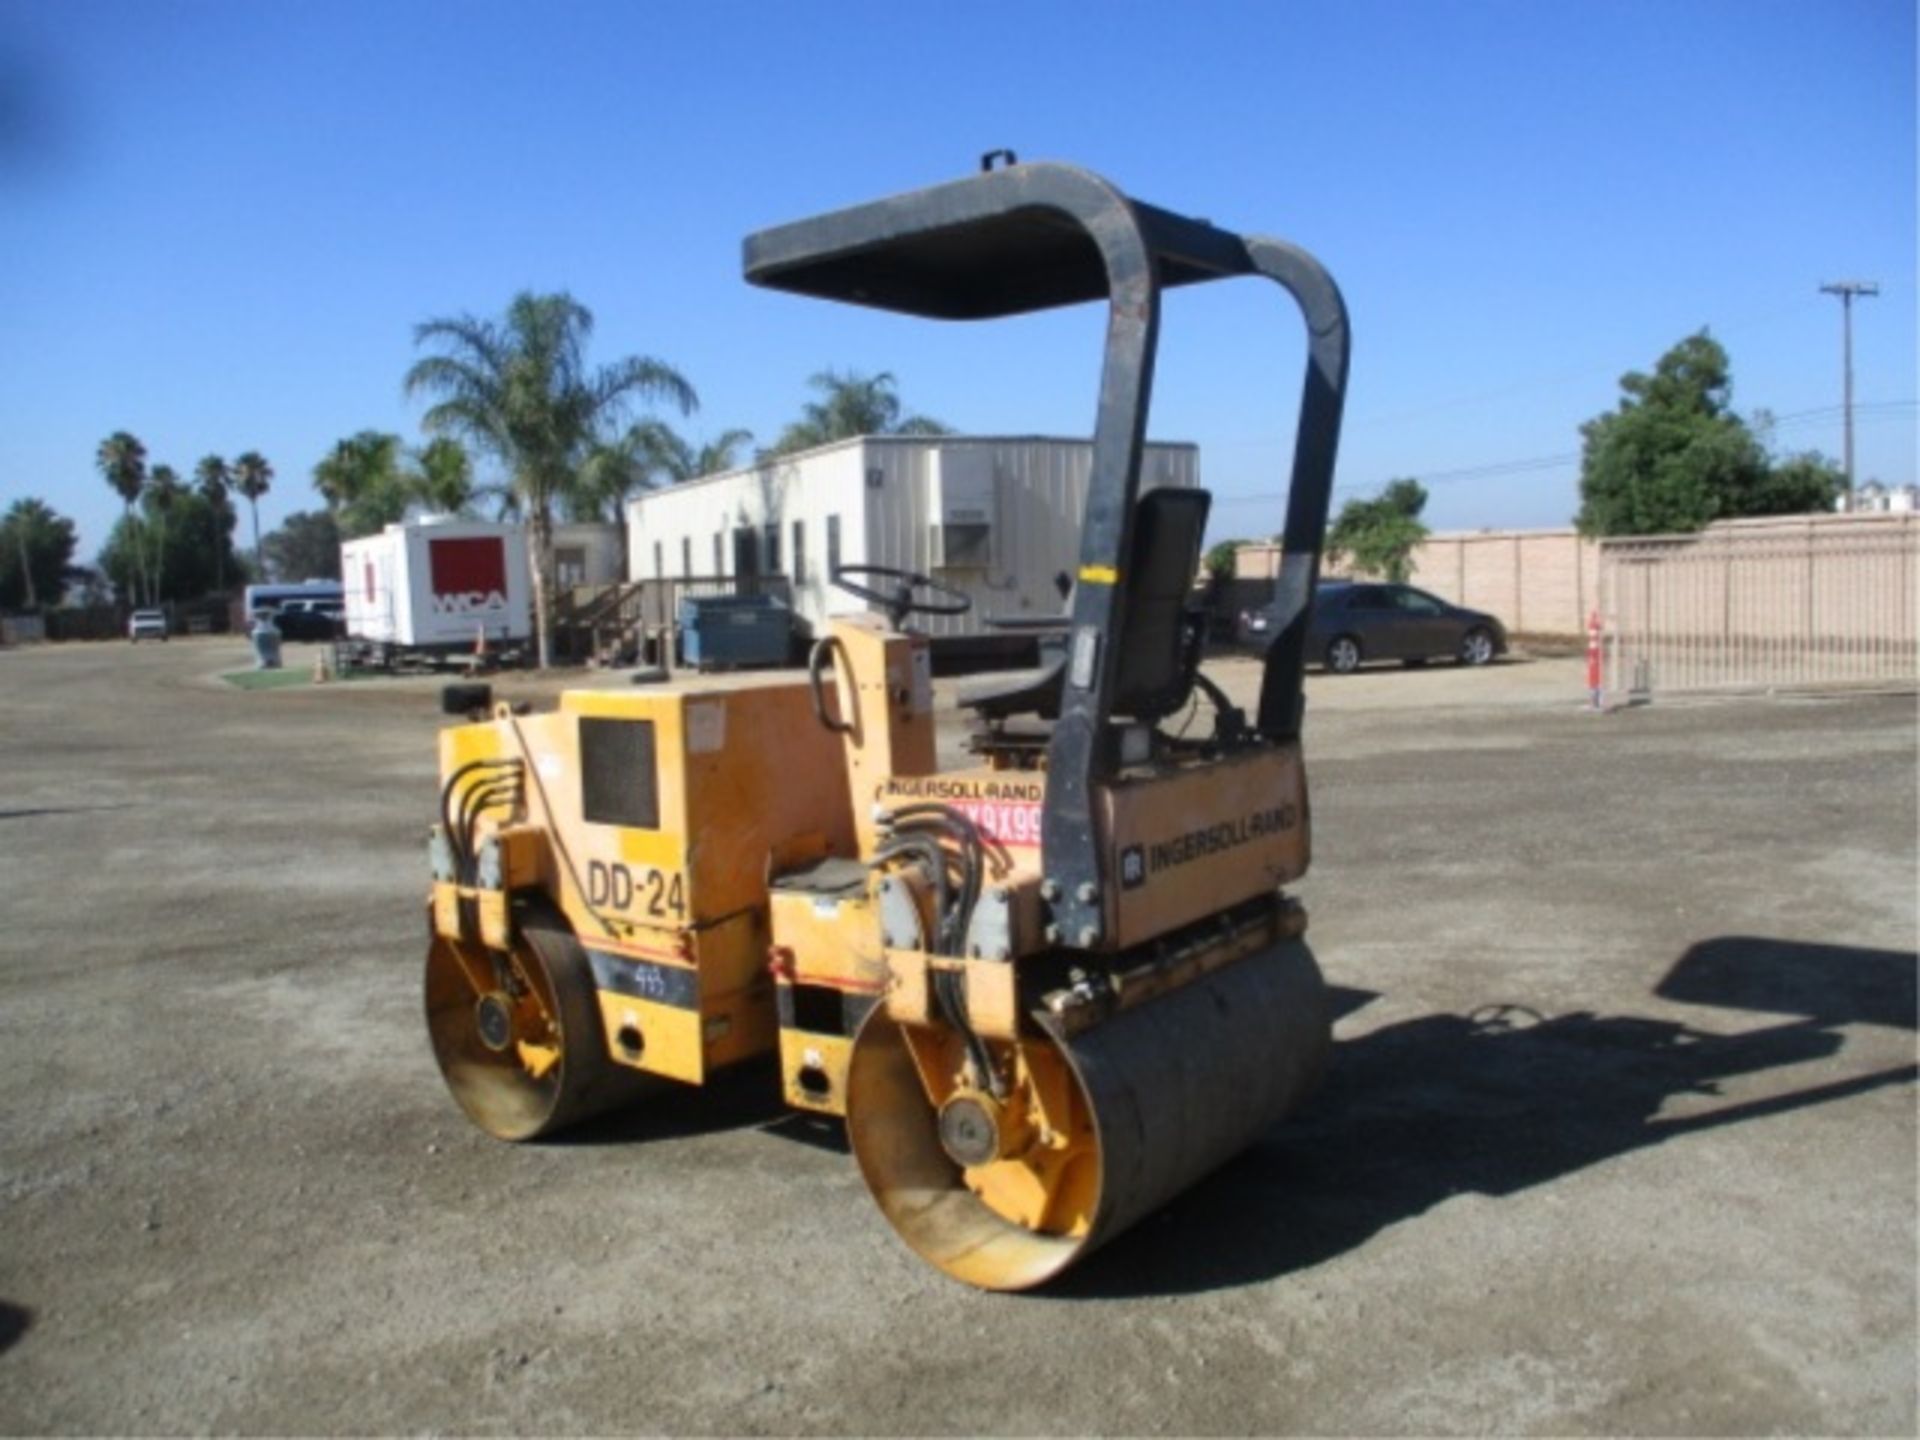 Ingersoll-Rand DD-24 Vibratory Roller, Hatz Diesel, 48" Drums, Water System, Canopy, S/N: 146681, - Image 14 of 45